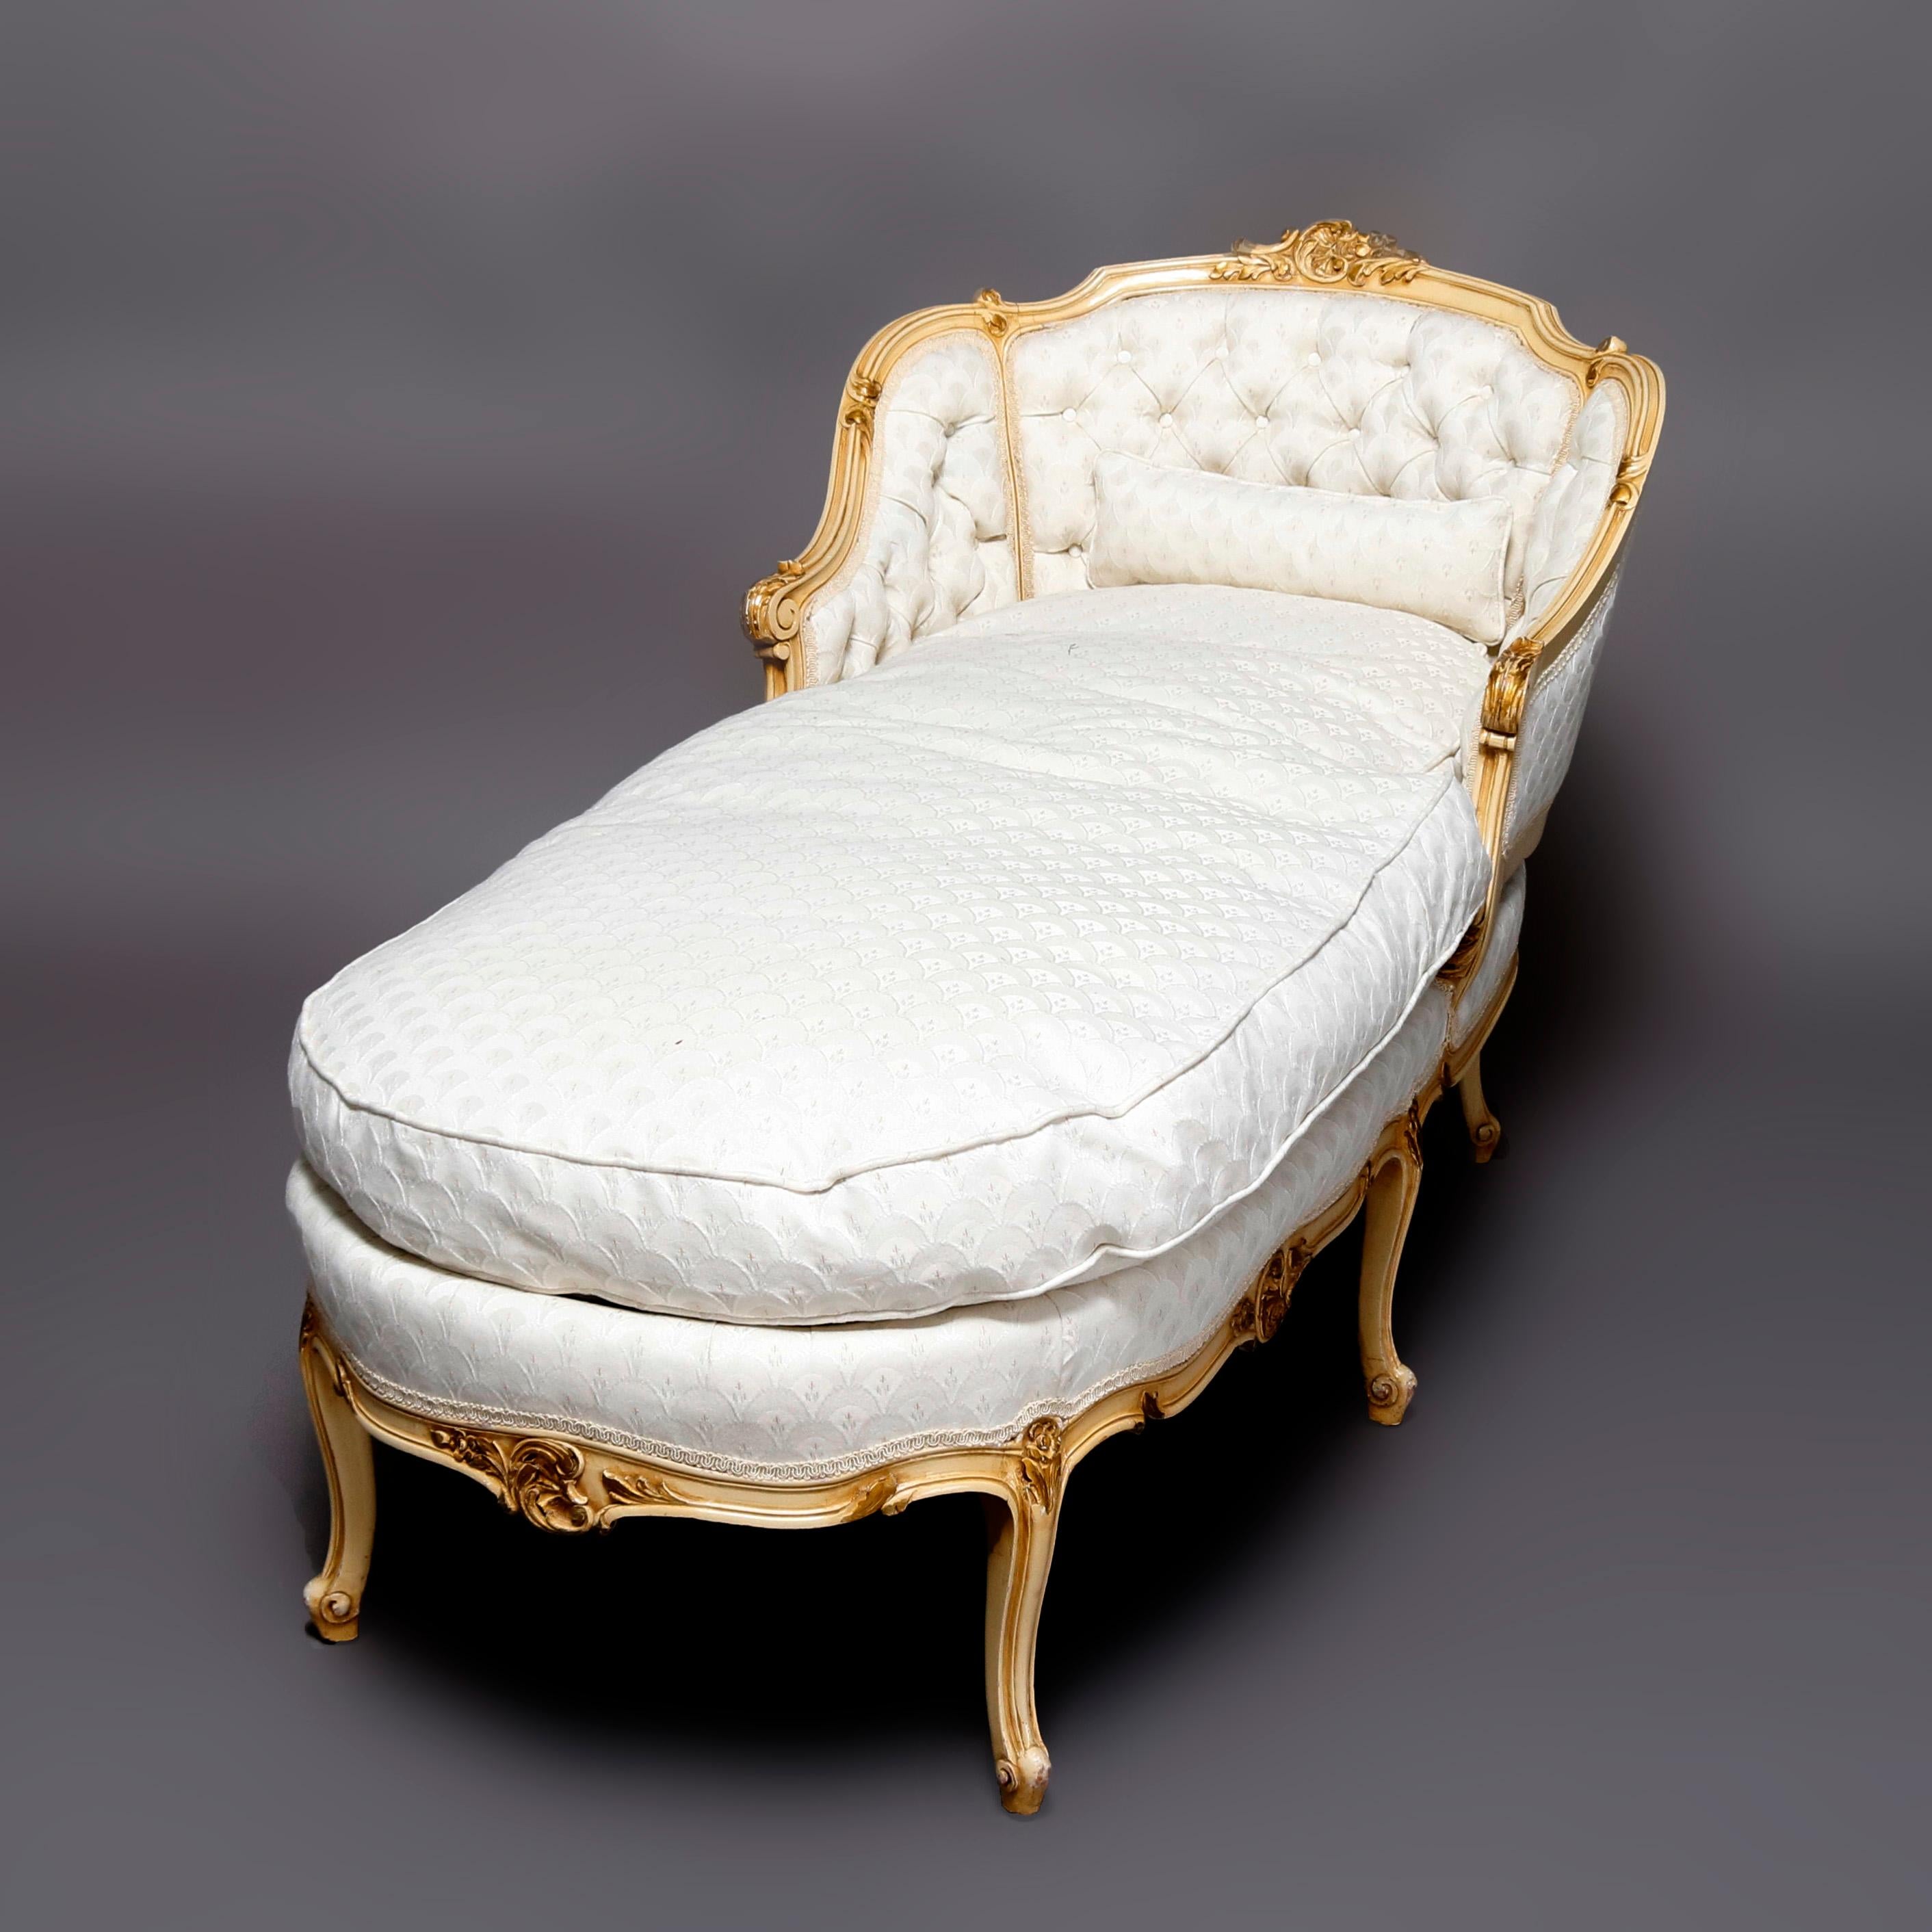 An antique French Louis XV style Recamier offers painted and gilt carved scroll form wood frame having shell and foliate form crest and accents, curved back with scroll arms and legs, upholstered with button back and arms, circa 1830.

***DELIVERY